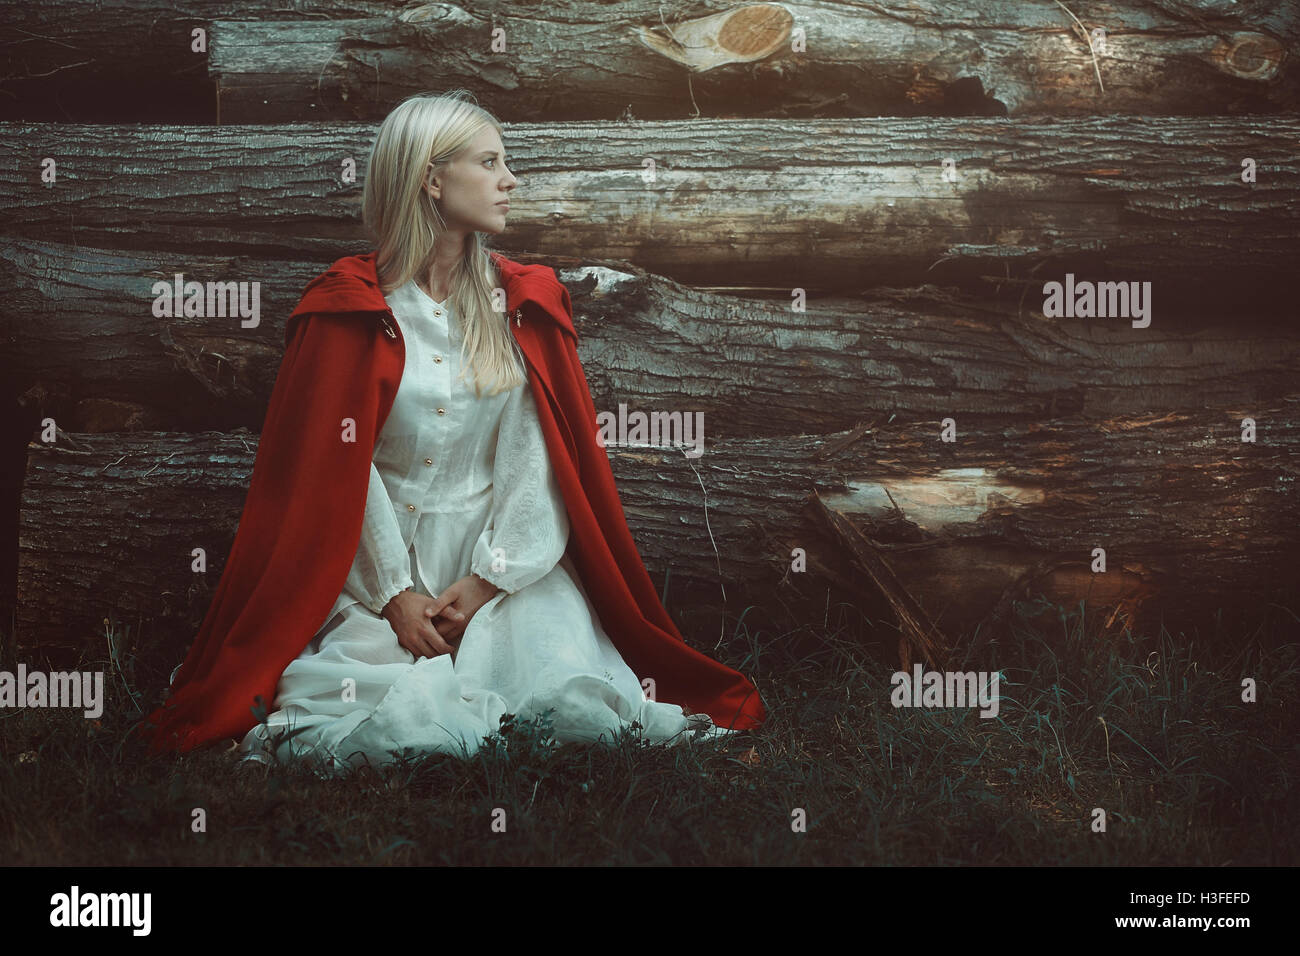 Blond woman with red hooded cloak. Fine art portrait Stock Photo